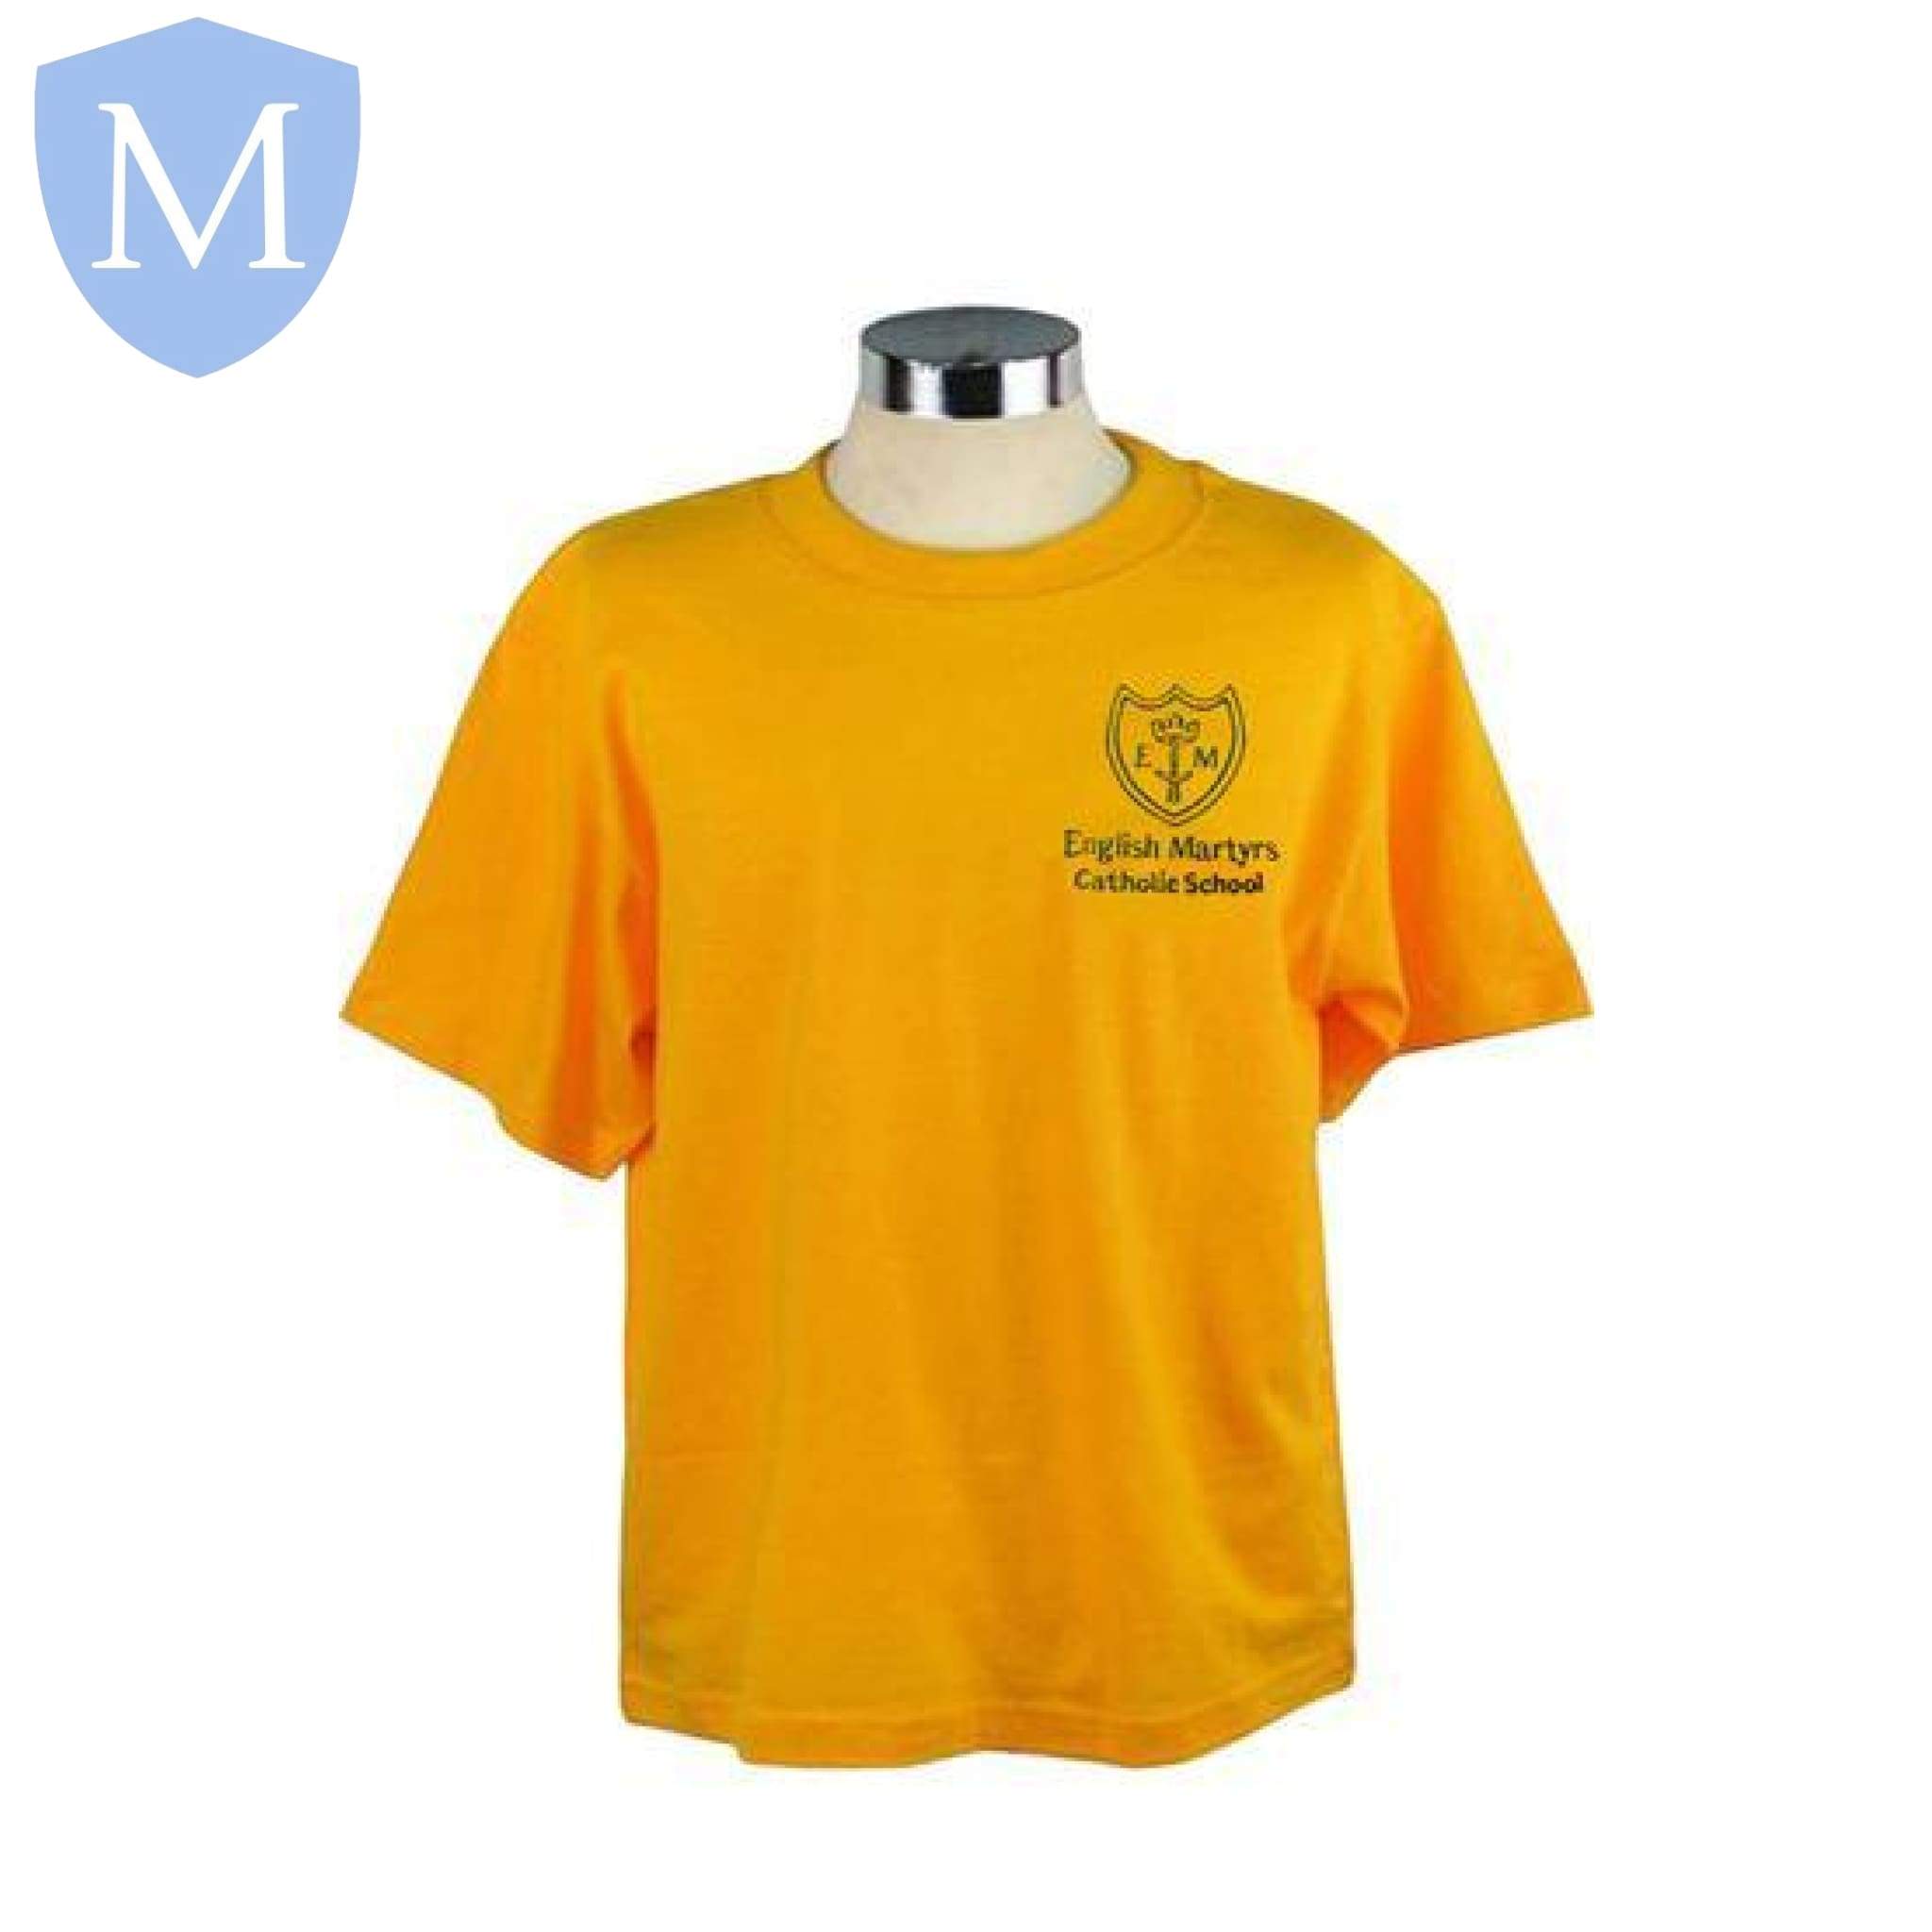 English Martyrs P.E T-Shirts Large,11-12 Years,2-3 Years,3-4 Years,5-6 Years,7-8 Years,9-10 Years,Medium,Small,X-L